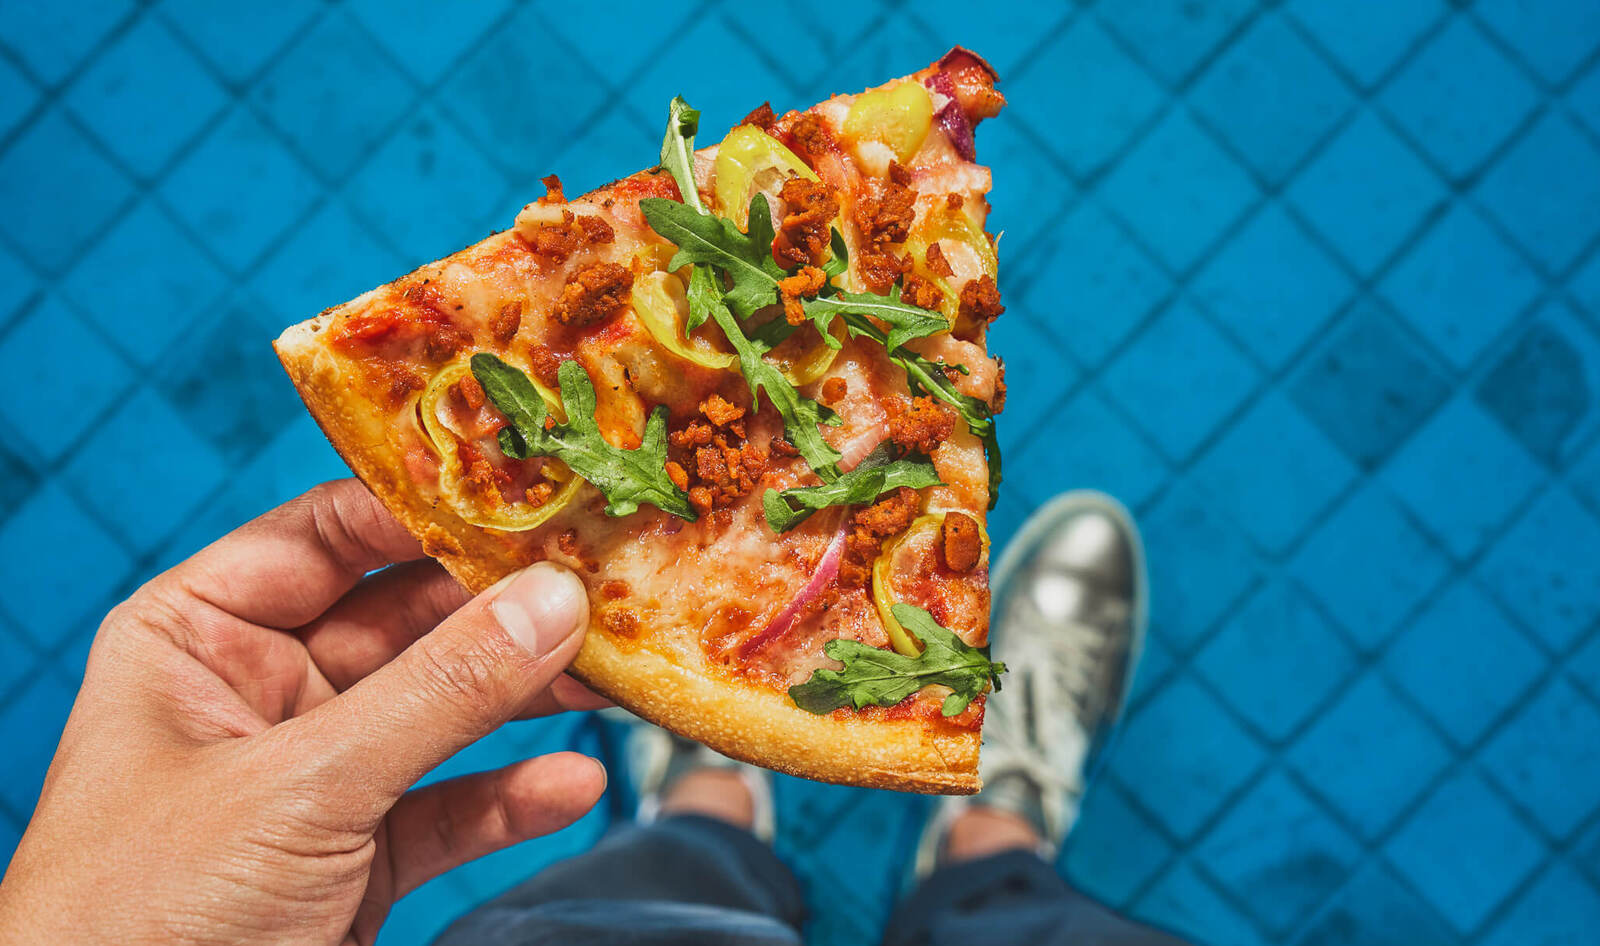 Vegan Pizza Near Me: 14 Chains That Do Delivery | VegNews